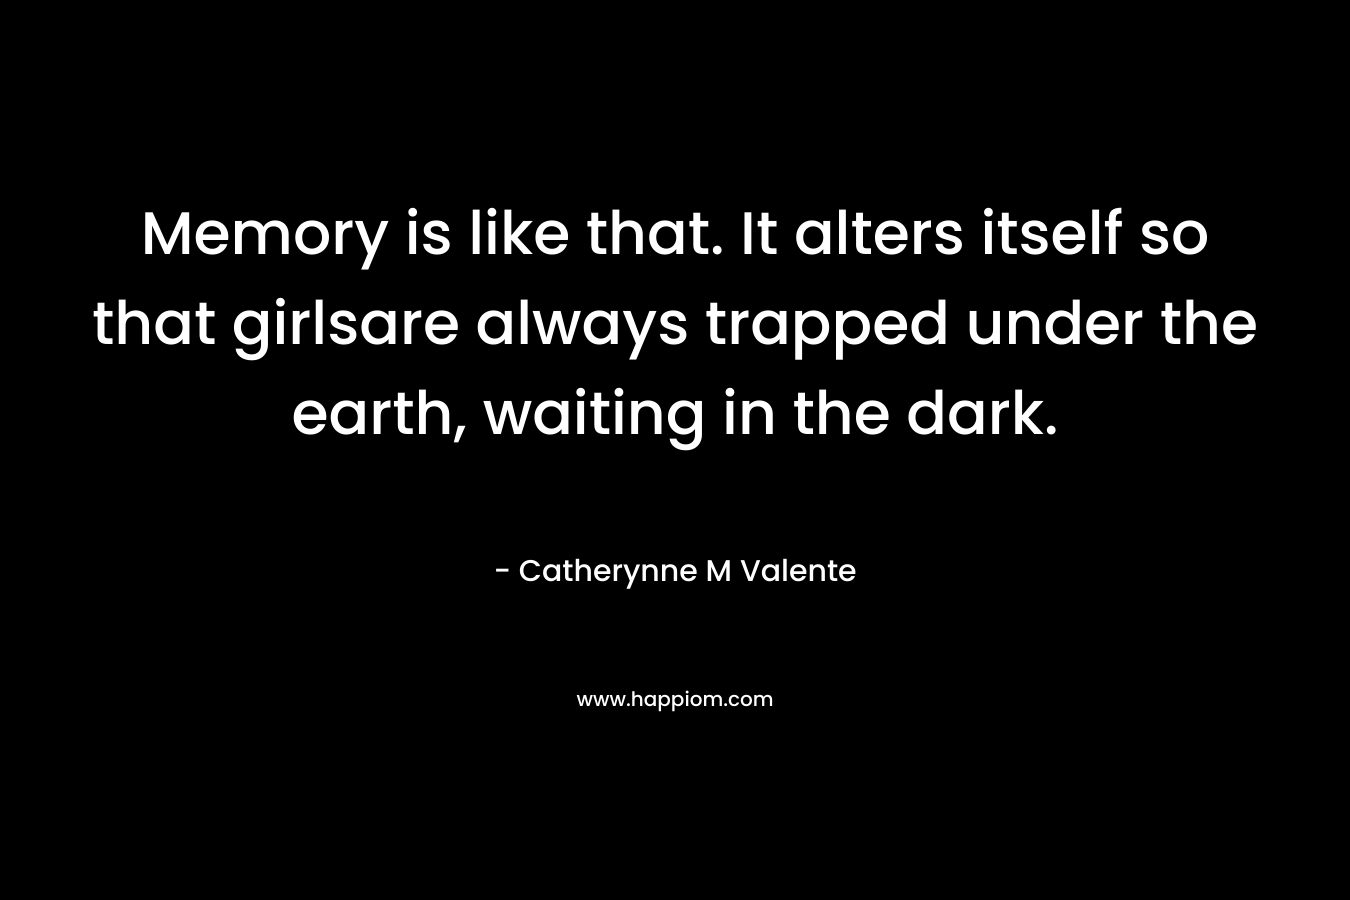 Memory is like that. It alters itself so that girlsare always trapped under the earth, waiting in the dark. – Catherynne M Valente